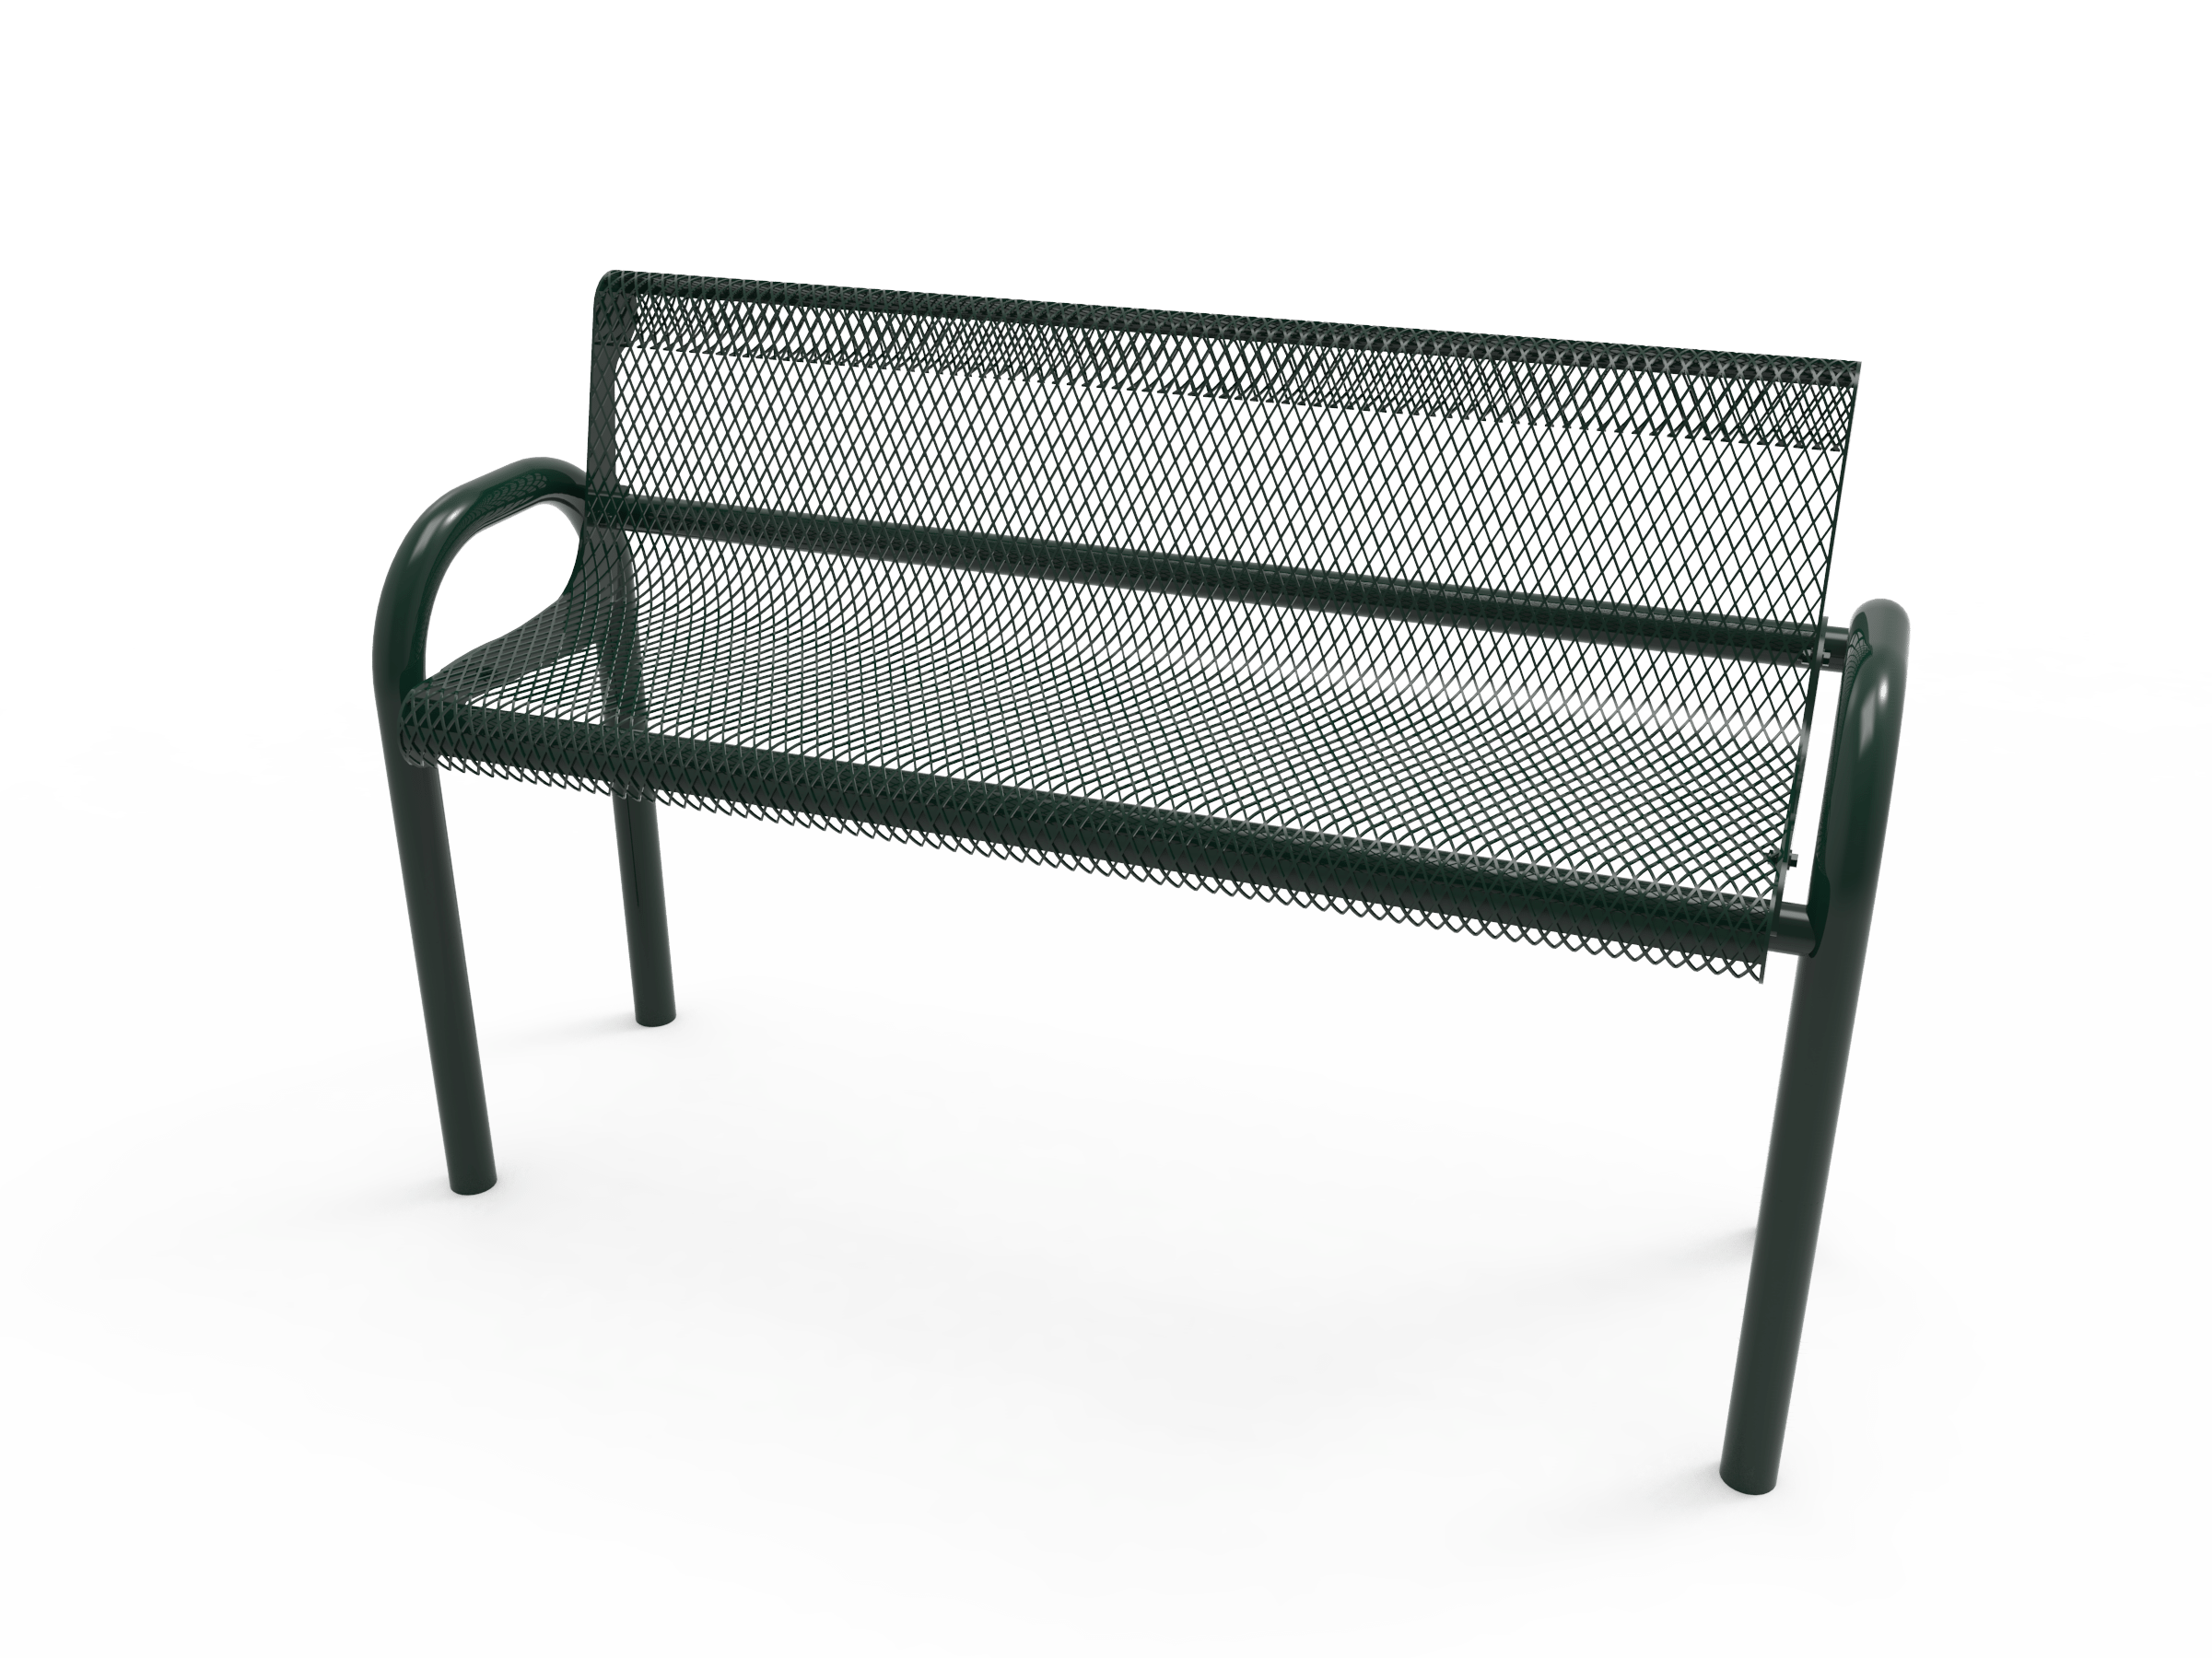 4′ Bench With Back In Ground-Mesh
BMD04-C-53-000
Industry Standard Finish
$829.00
BMD04-A-53-000
Advantage Premium Finish
$1029.00
